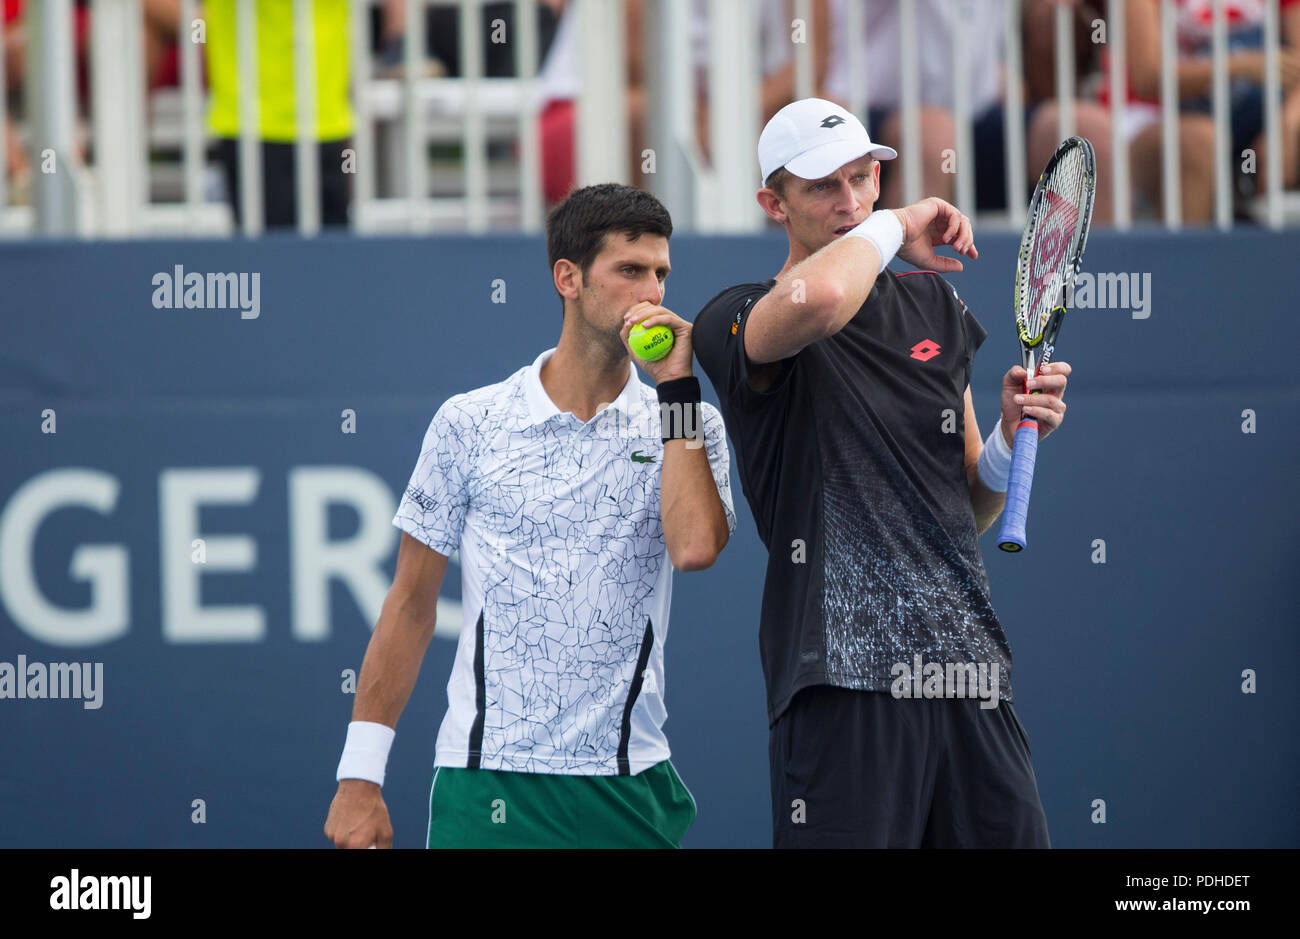 toronto-canada-9th-aug-2018-novak-djokovic-l-of-serbia-and-kevin-anderson-of-south-africa-react-during-the-second-round-of-mens-doubles-match-against-pierre-hugues-herbertnicolas-mahut-of-france-at-the-2018-rogers-cup-in-toronto-canada-aug-9-2018-novak-djokovickevin-anderson-won-2-1-credit-zou-zhengxinhuaalamy-live-news-PDHDET.jpg